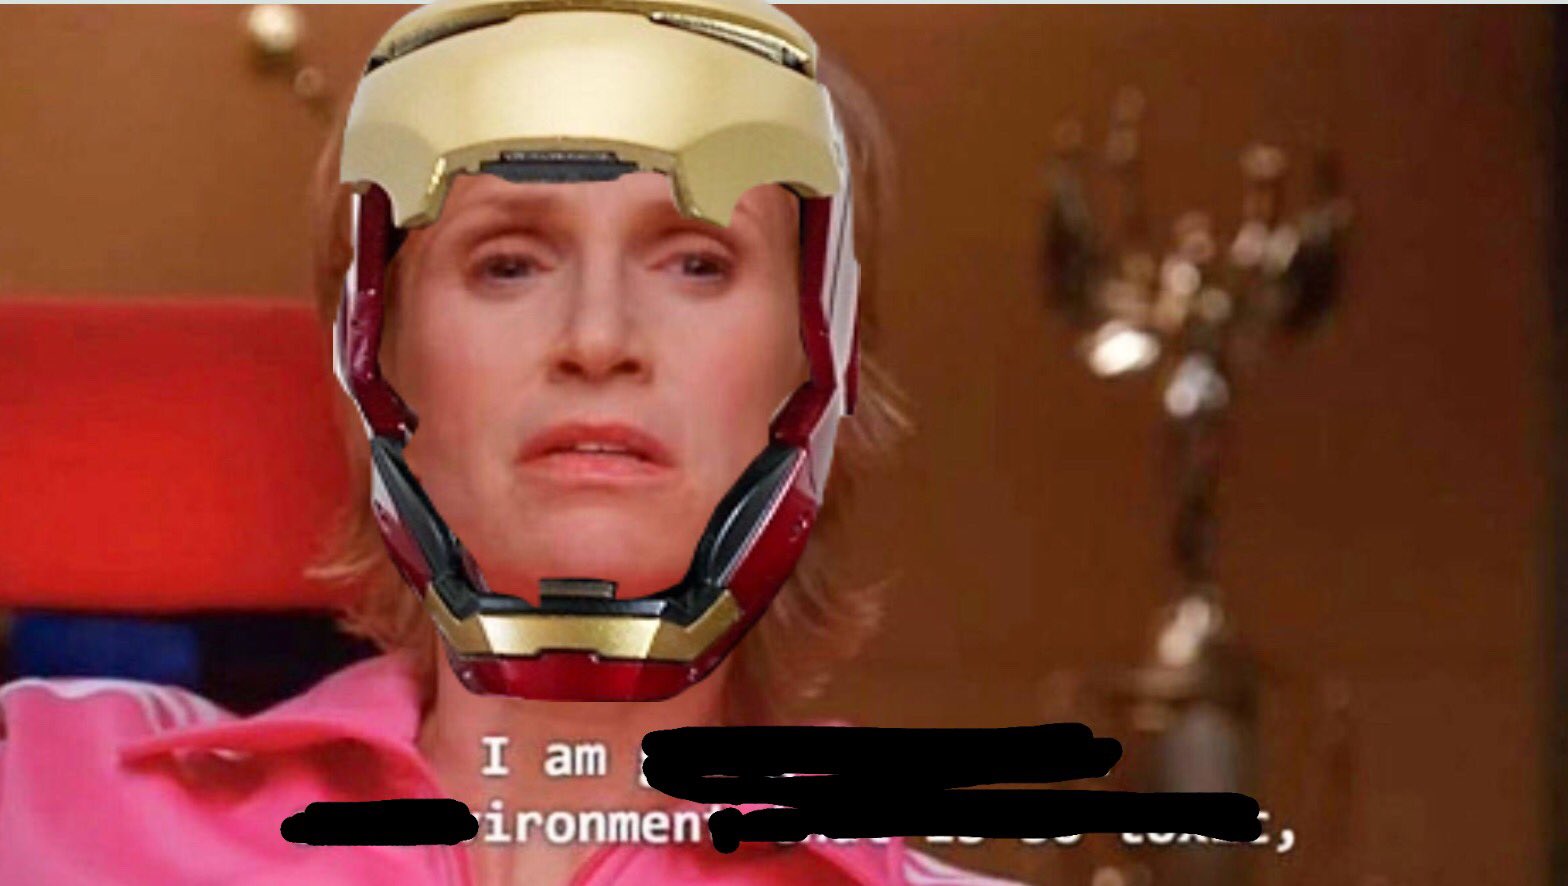 im going to create an environment so toxic meme, sue sylvester meme, glee meme, glee toxic meme, toxic glee meme, toxic sue sylvester meme, sue sylvester memes, sue sylvester toxic meme, toxic sue sylvester memes, an environment so toxic meme